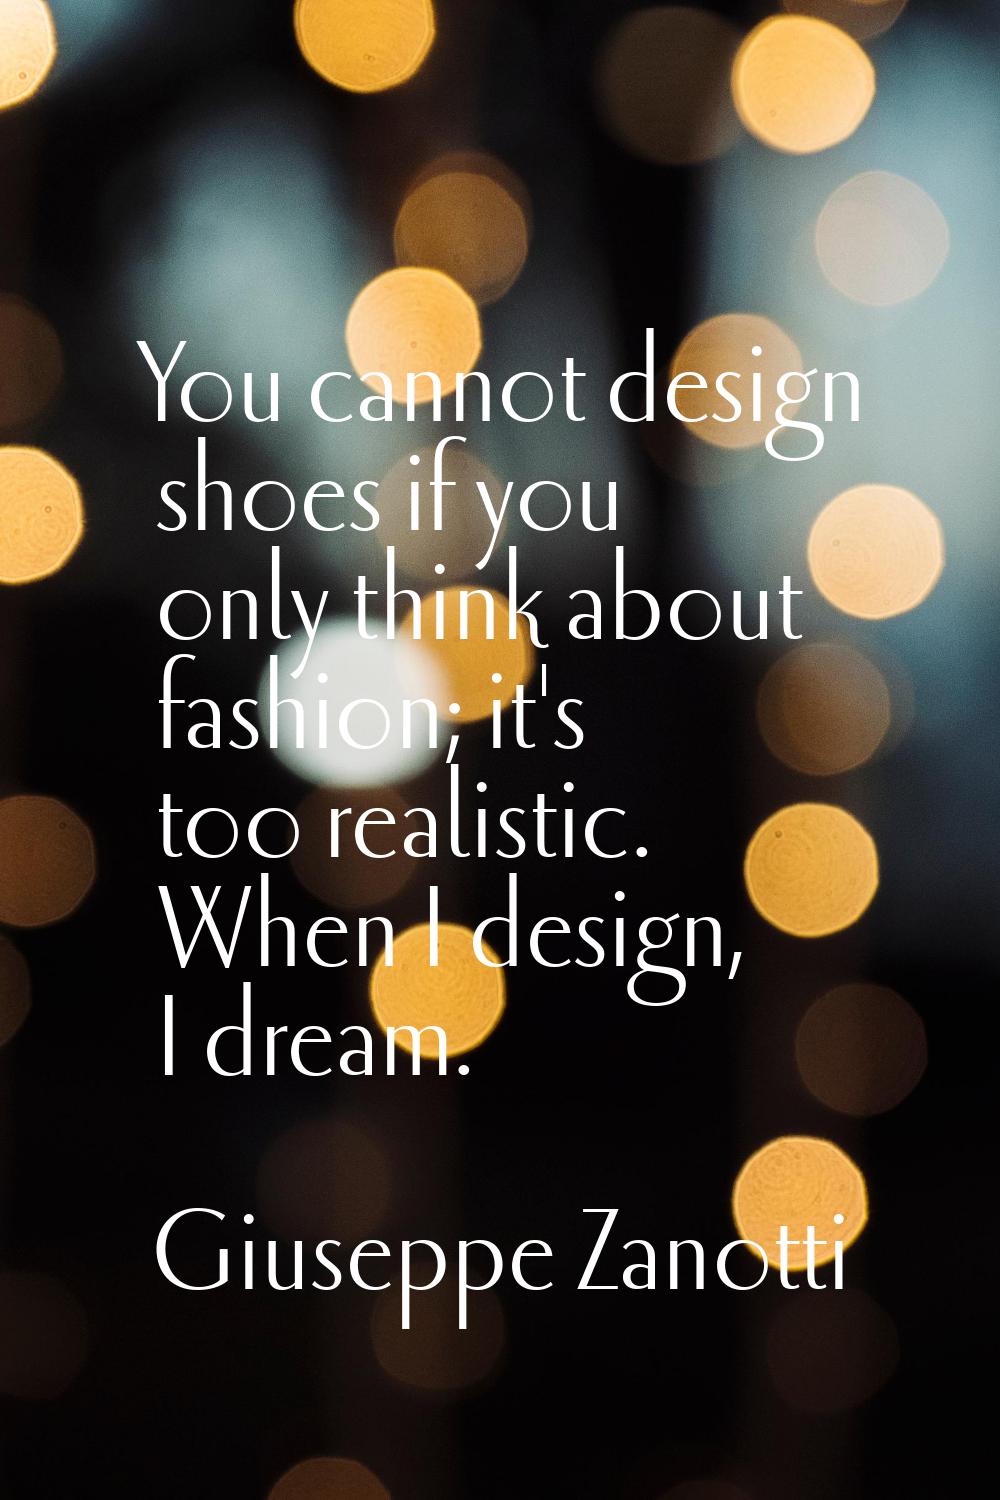 You cannot design shoes if you only think about fashion; it's too realistic. When I design, I dream